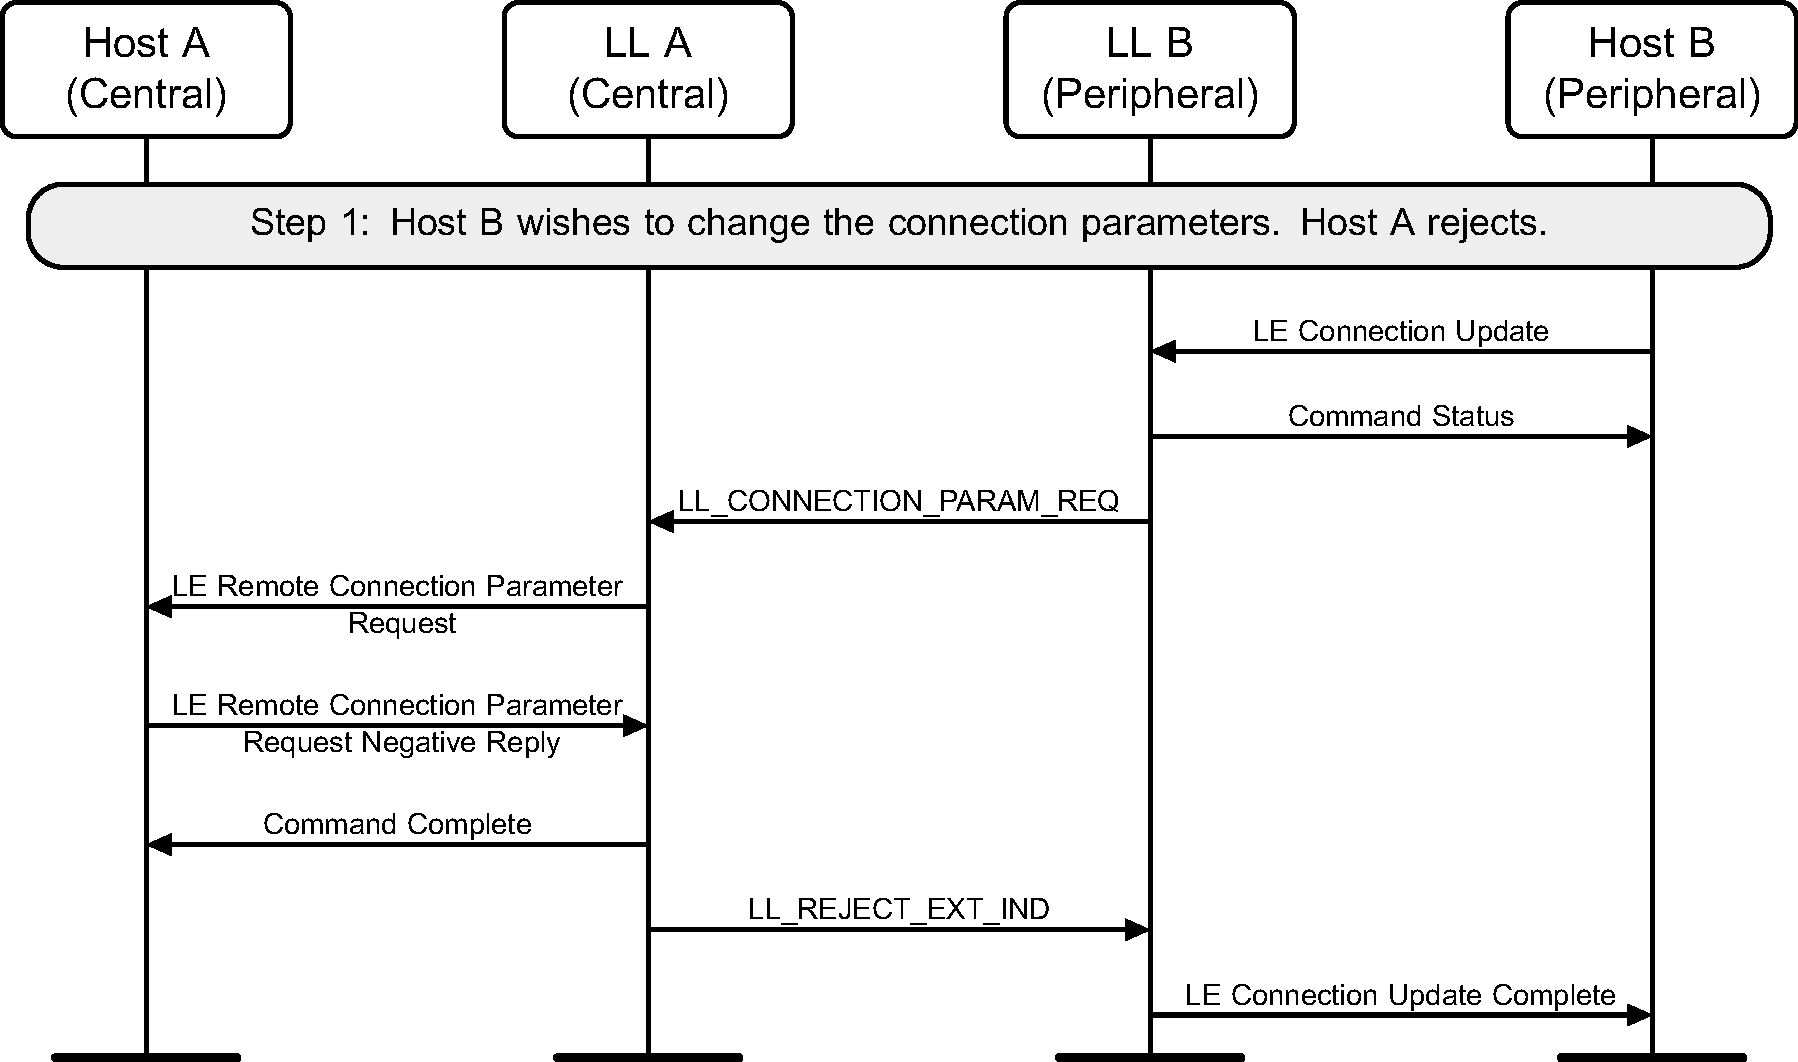 Peripheral-initiated Connection Parameters Request procedure – Peripheral requests change in LE connection parameters, Central’s Host rejects